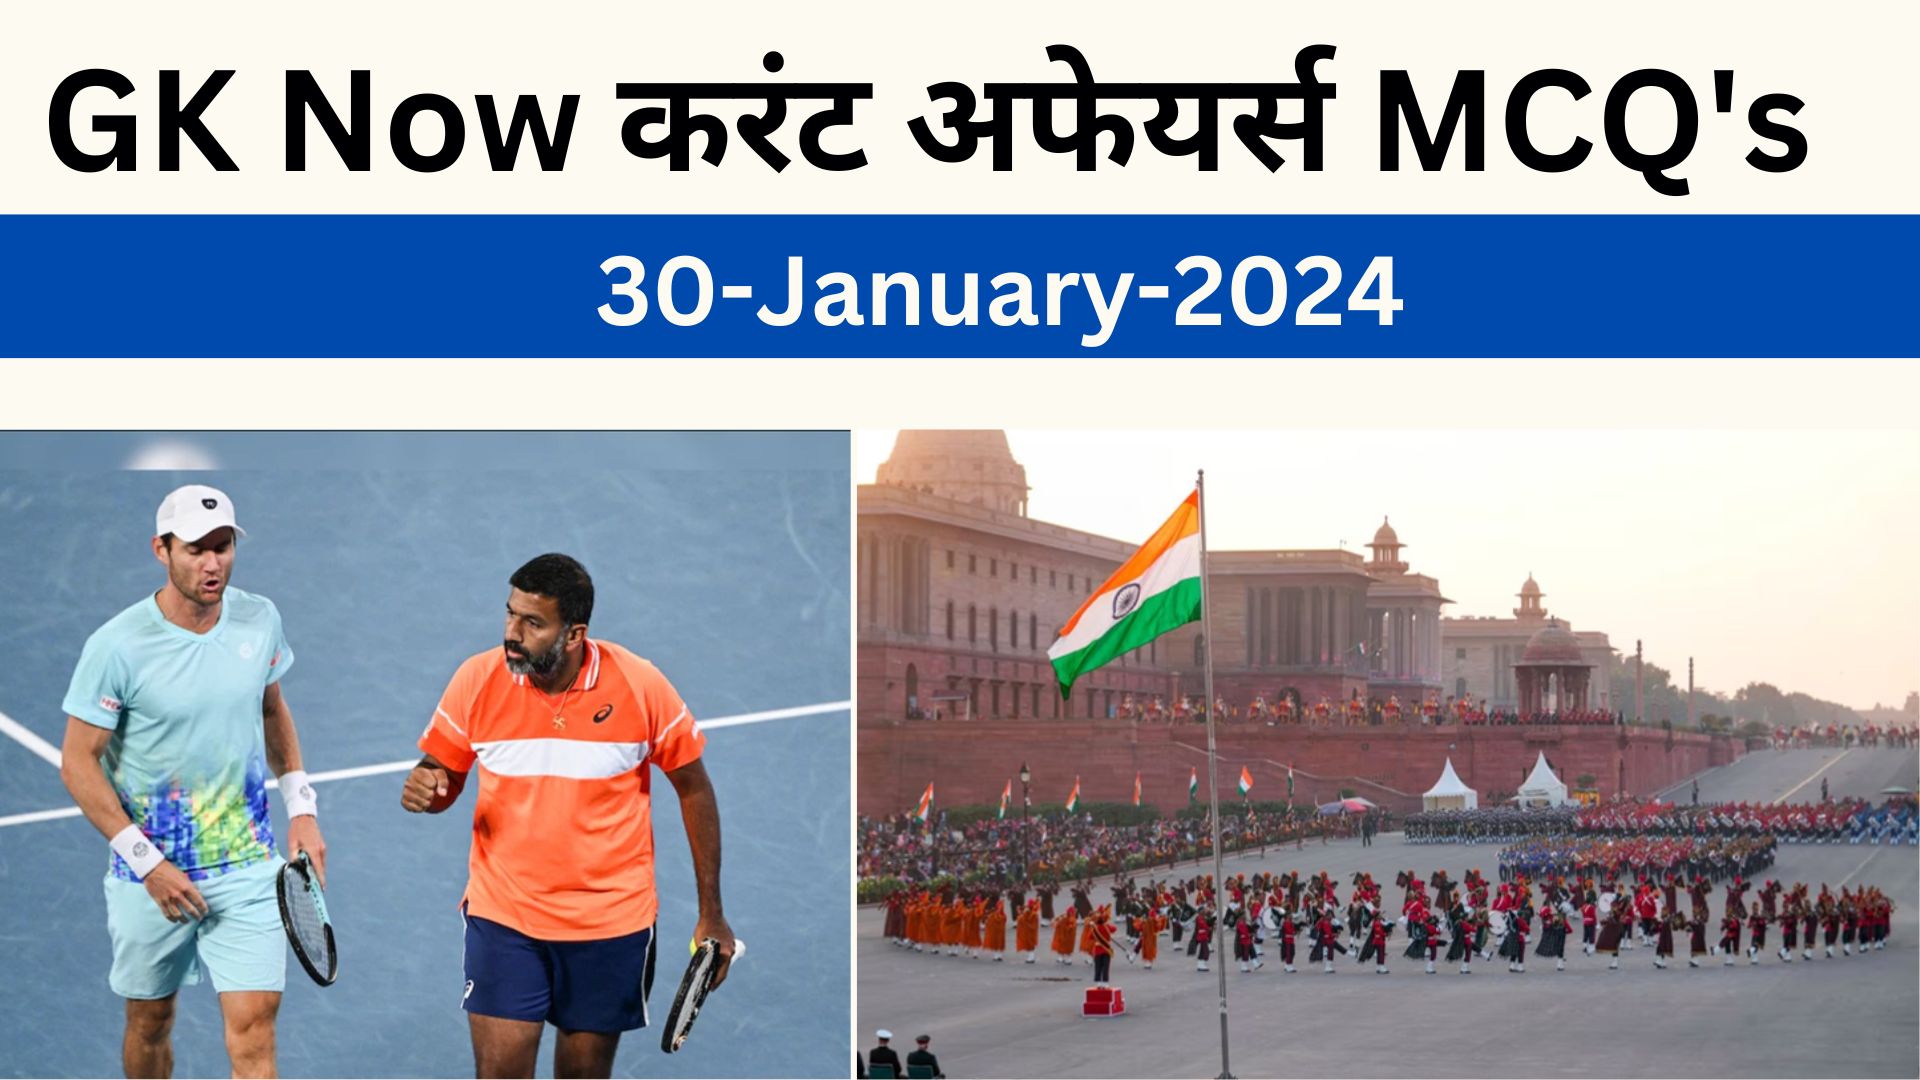 Daily Current Affairs MCQ 30 January 2024 GK Now